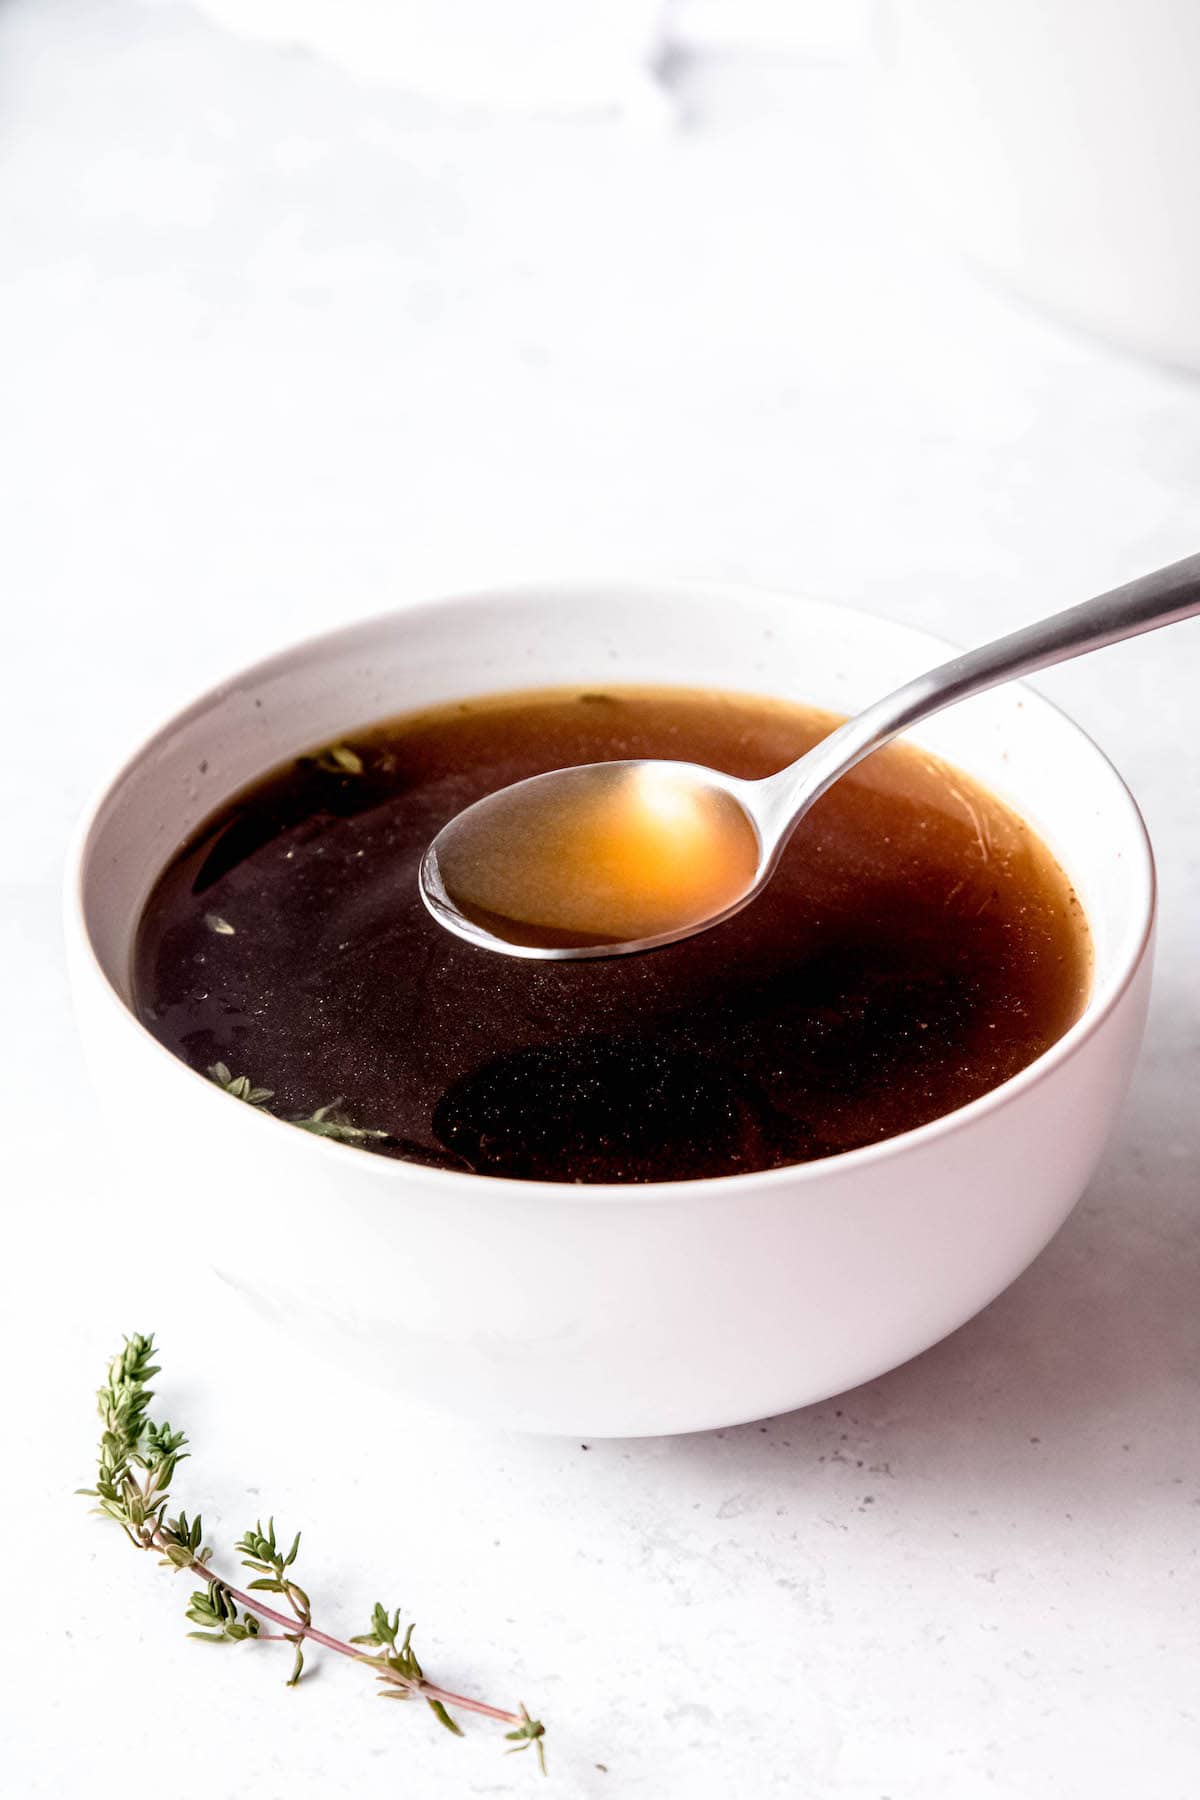 small white bowl filled with rich, dark beef brown bone broth from scraps with a soup spoon taking a bite.